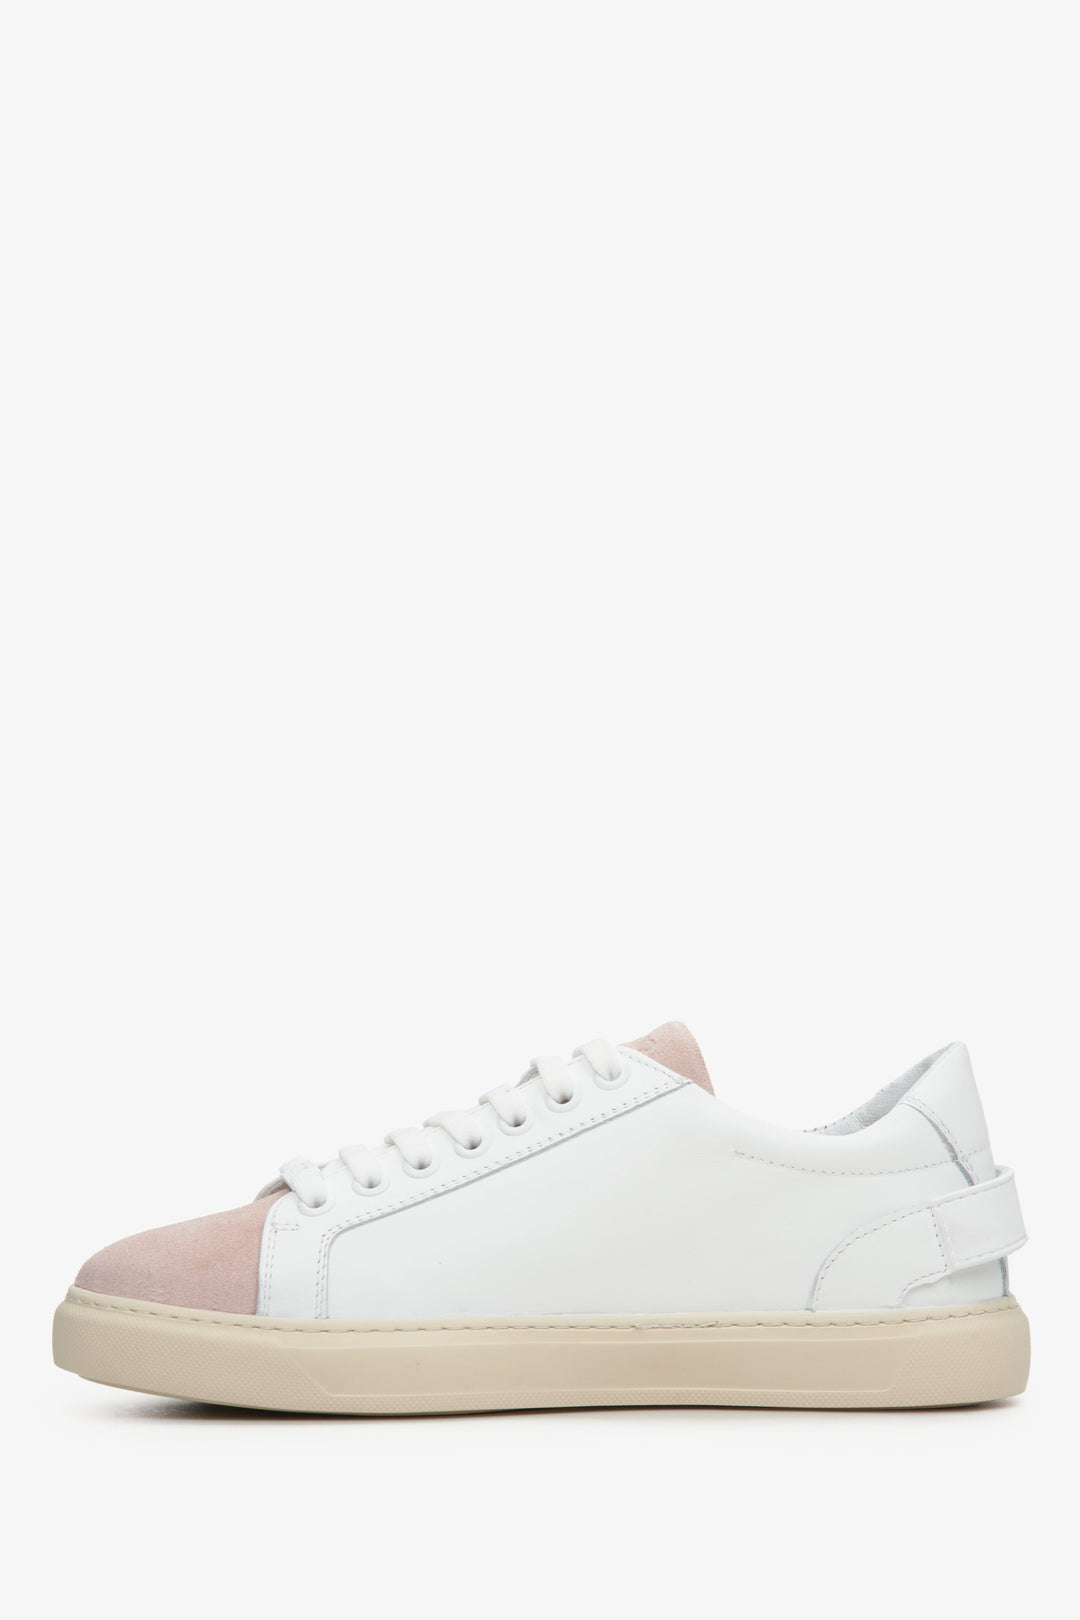 White and pink leather and suede women's sneakers by Estro: presentation of the shoe profile.